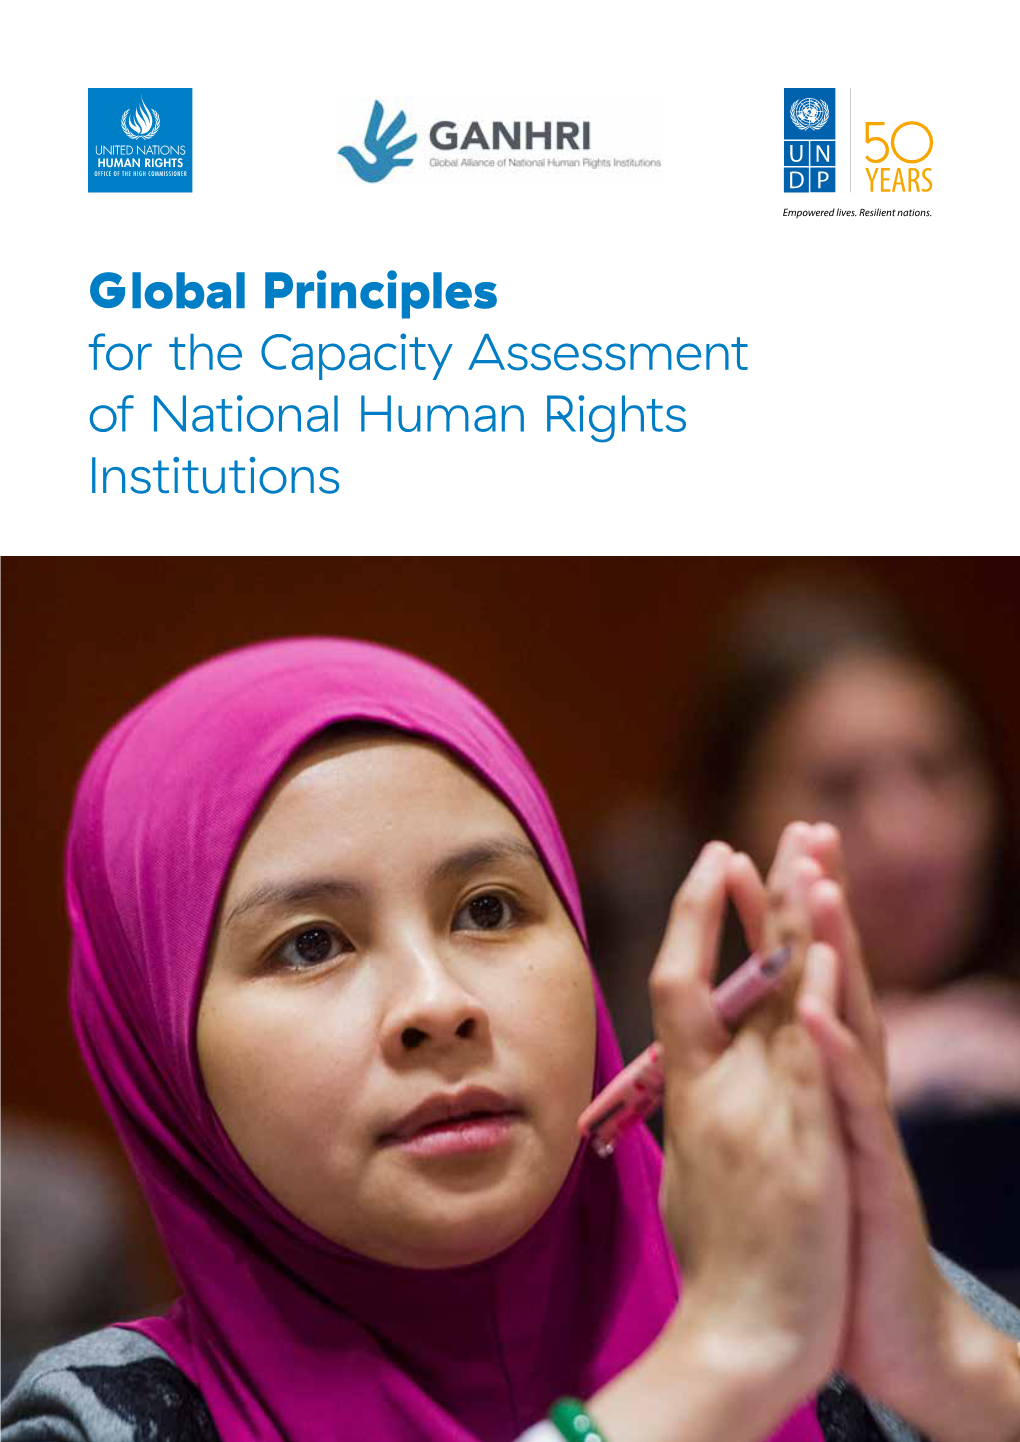 Global Principles for the Capacity Assessment of National Human Rights Institutions